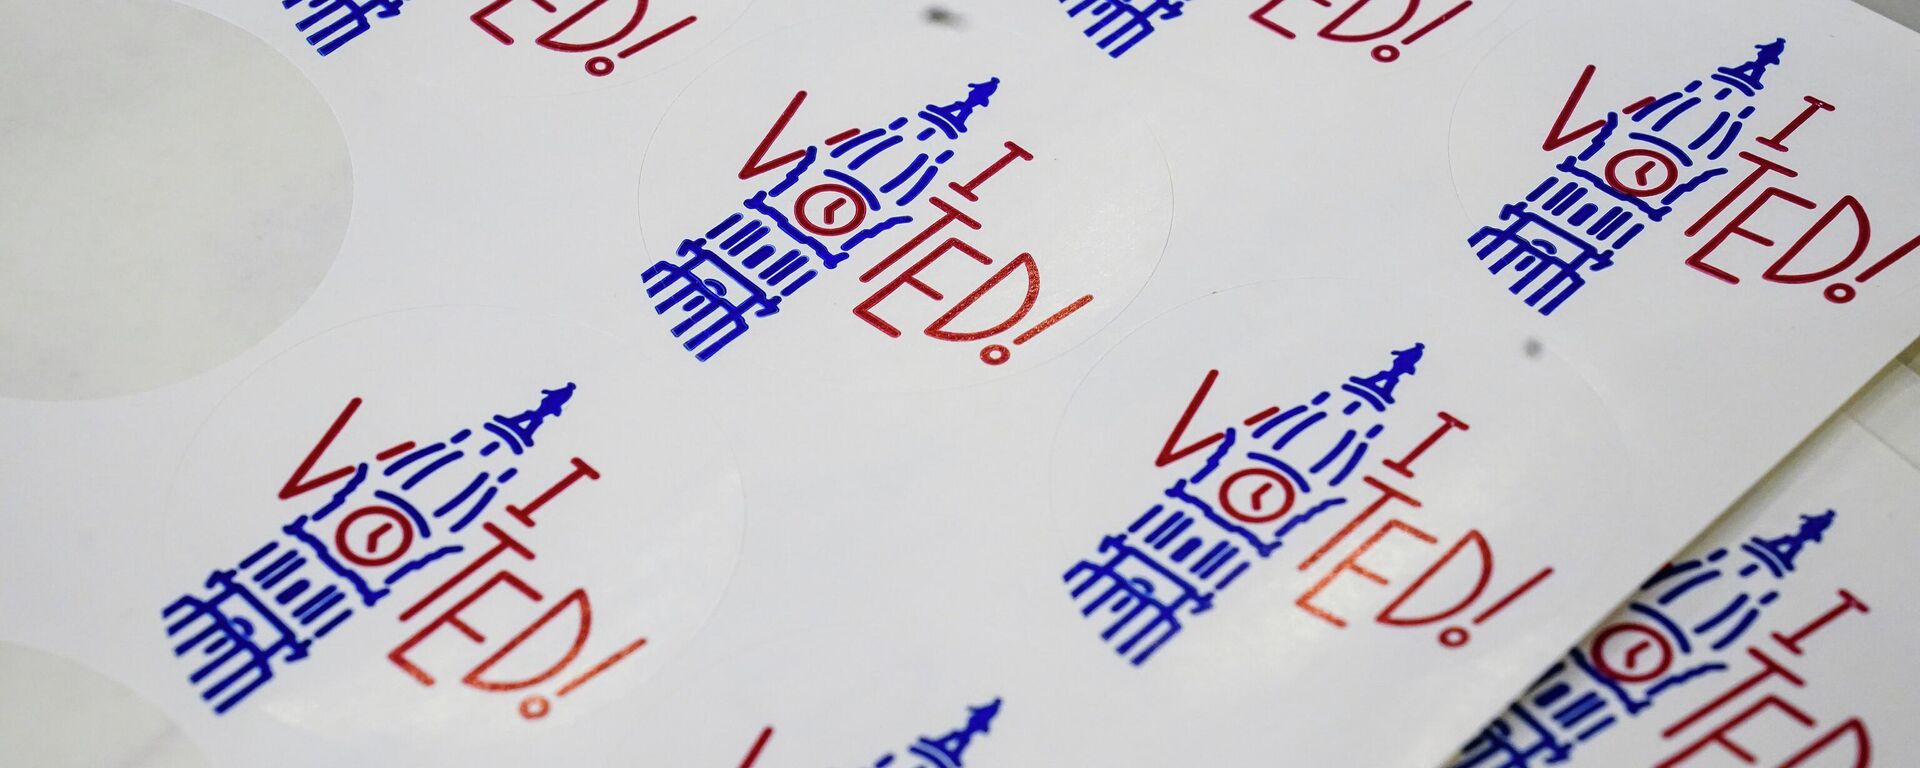 Stickers for voters in the midterm elections are set out at a polling place located at the Museum of the American Revolution in Philadelphia, Tuesday, Nov. 8, 2022.  - Sputnik International, 1920, 17.11.2022